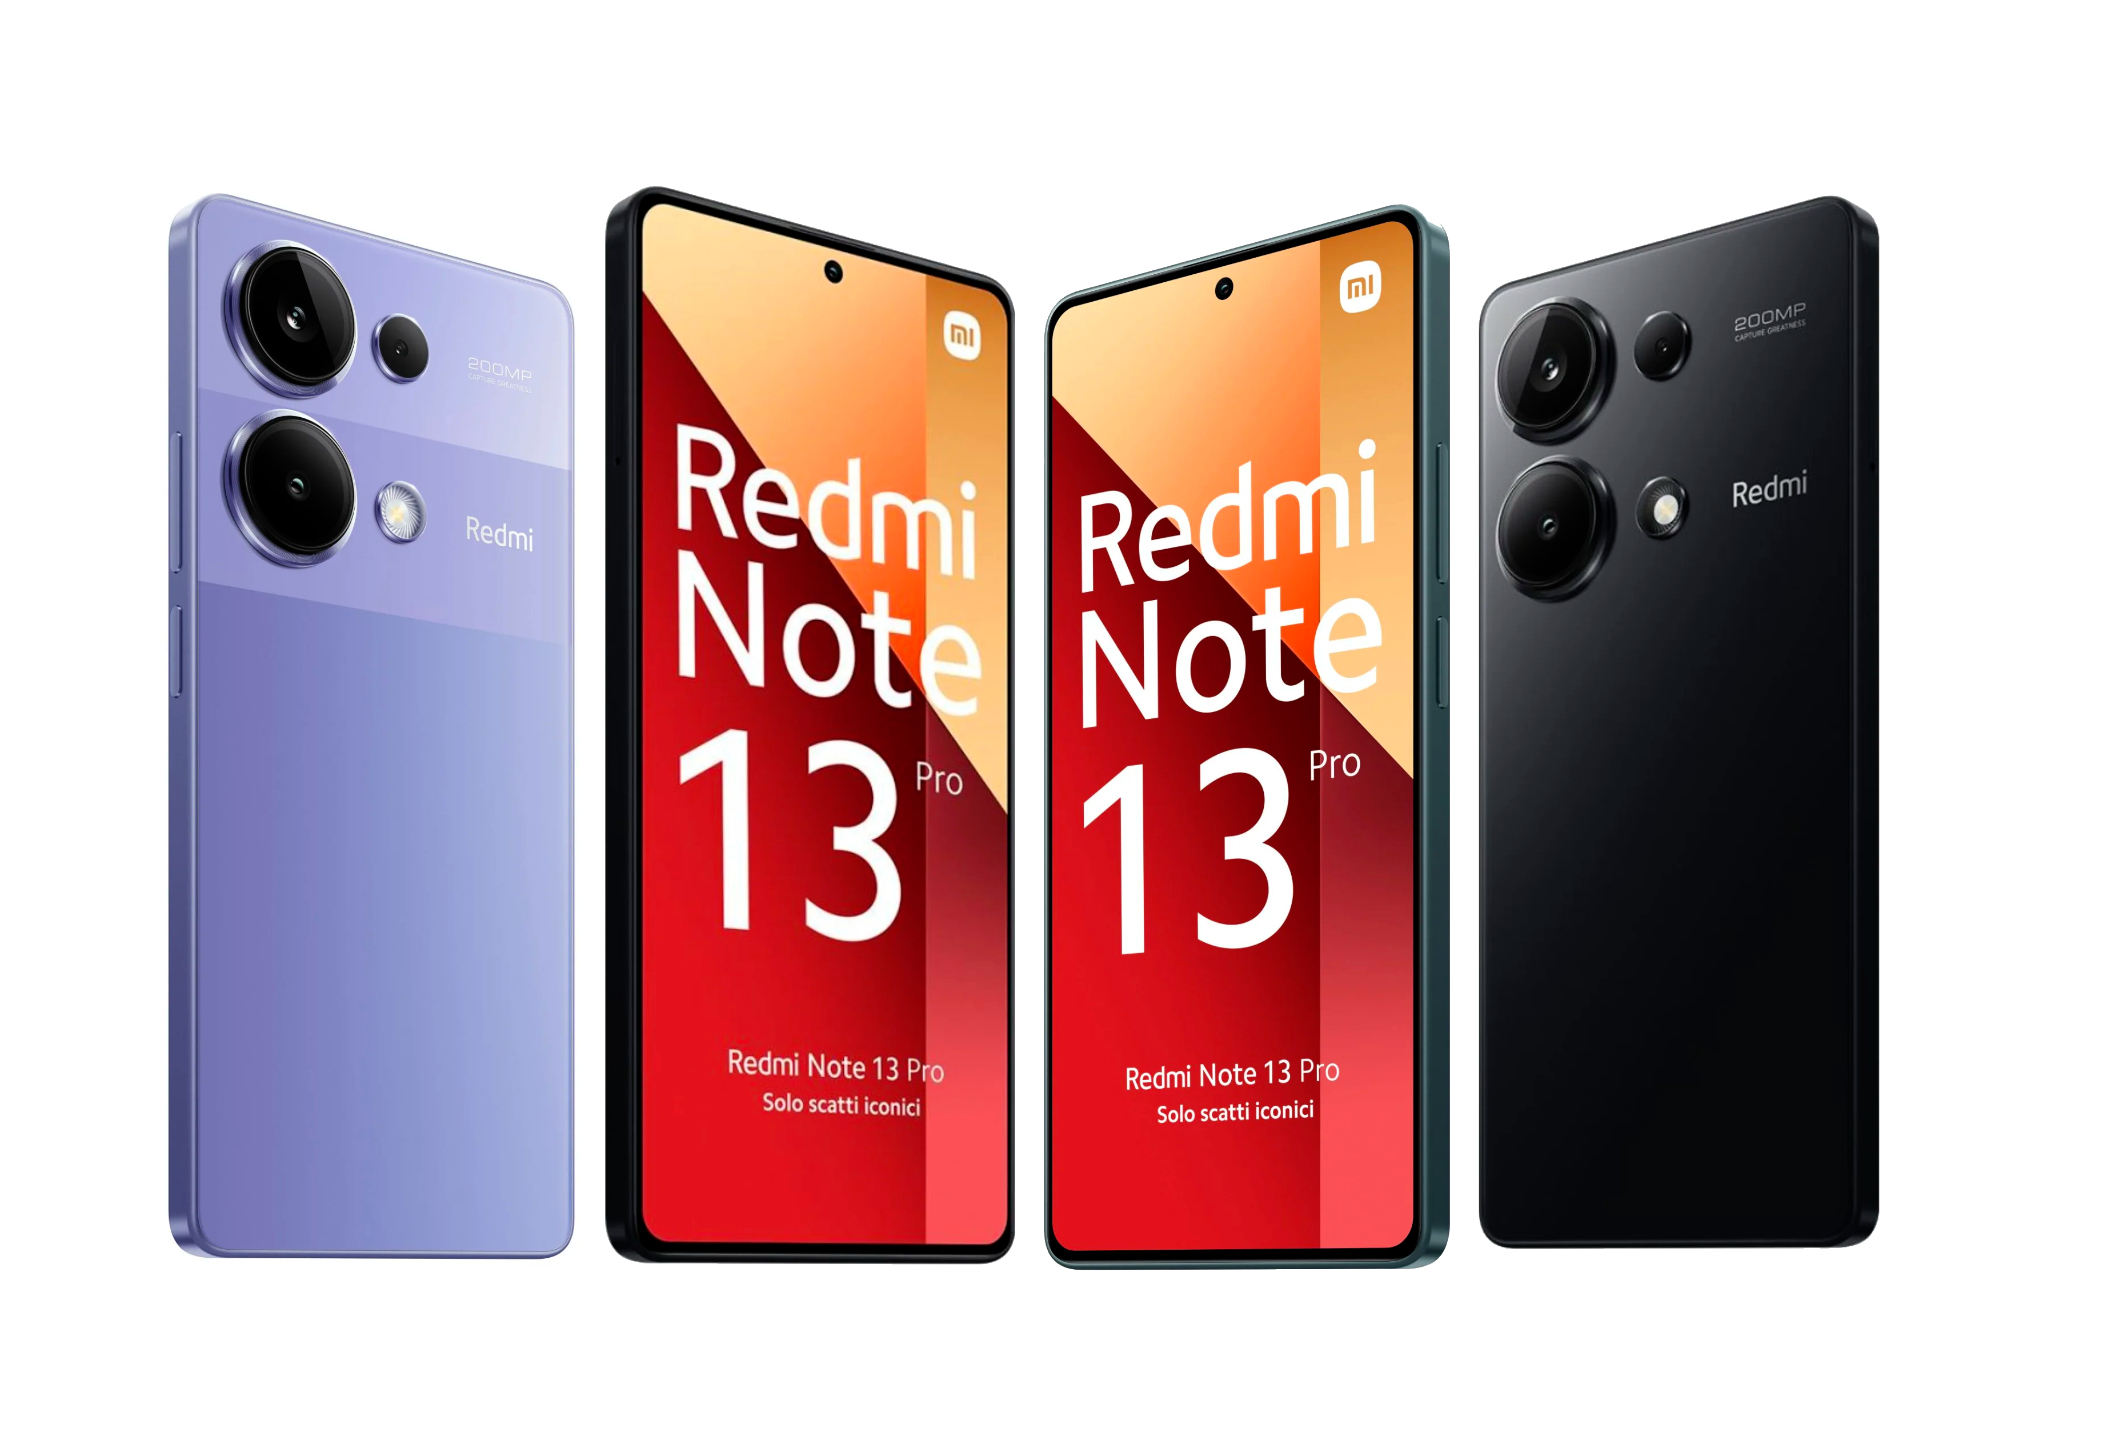 Xiaomi Redmi Note 13 Pro 4G: Specifications, European pricing and